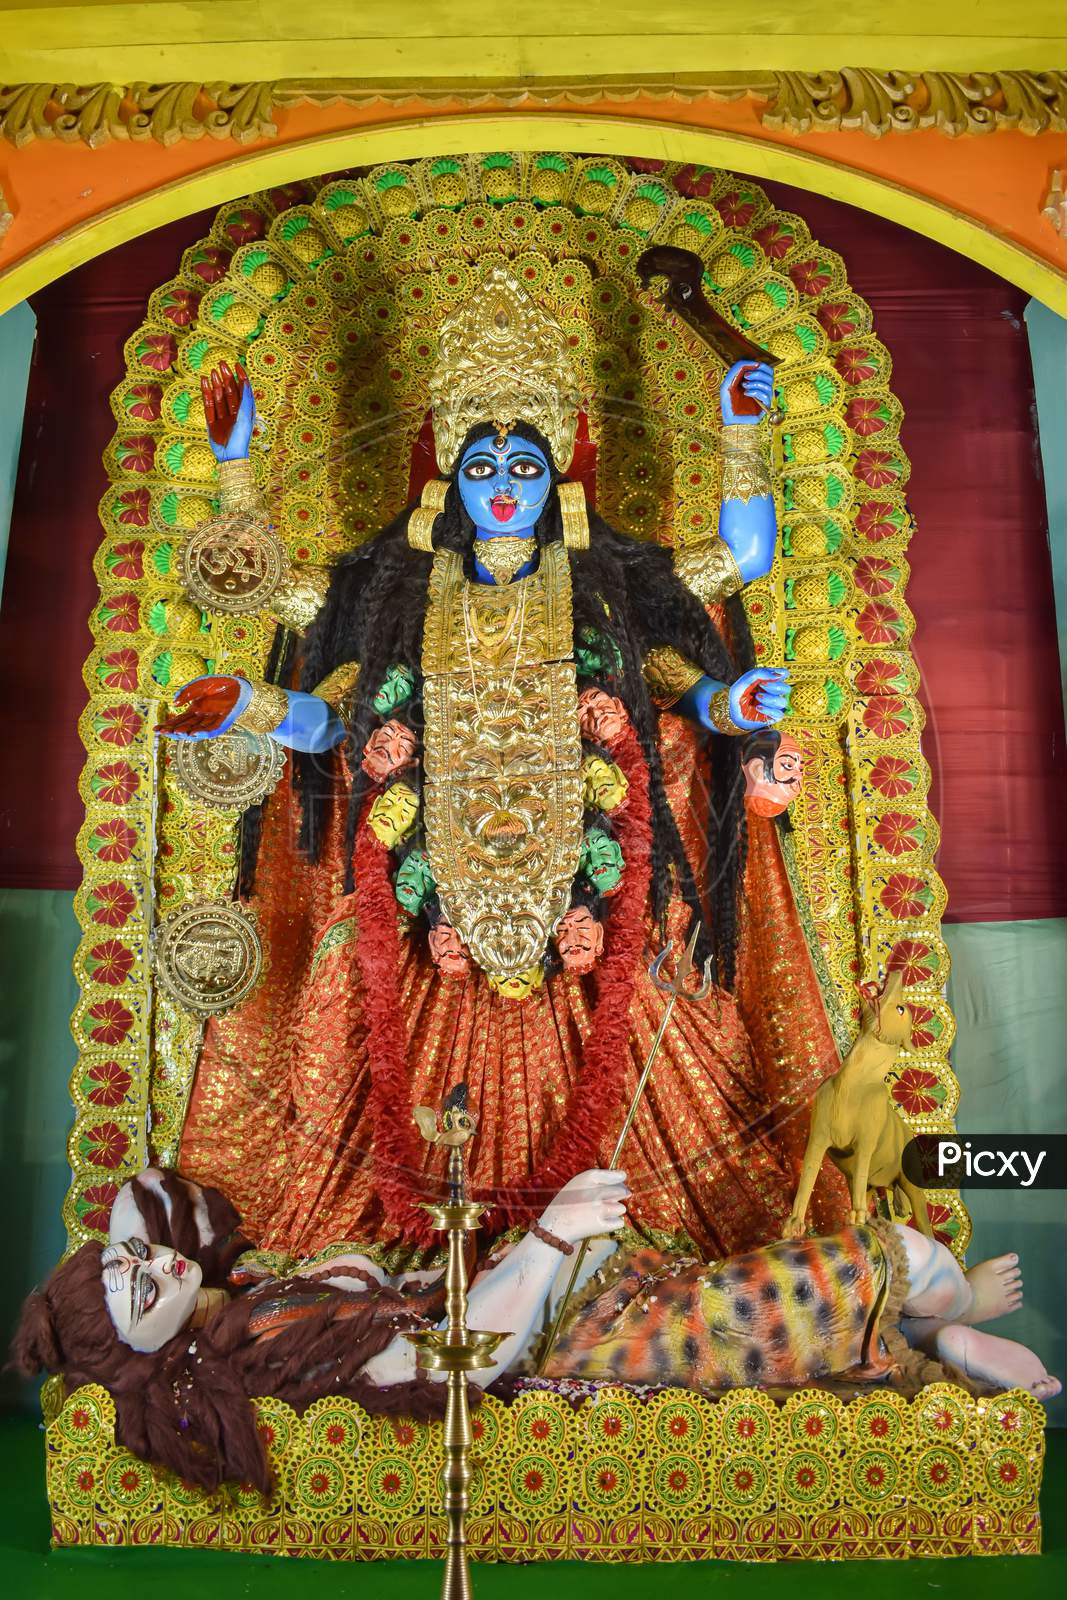 Goddess Kali Idol Decorated At Puja Pandal, Kali Puja Also Known As Shyama Puja Or Mahanisha Puja, Is A Festival Dedicated To The Hindu Goddess Kali, Celebrated On The New Moon Day In West Bengal.